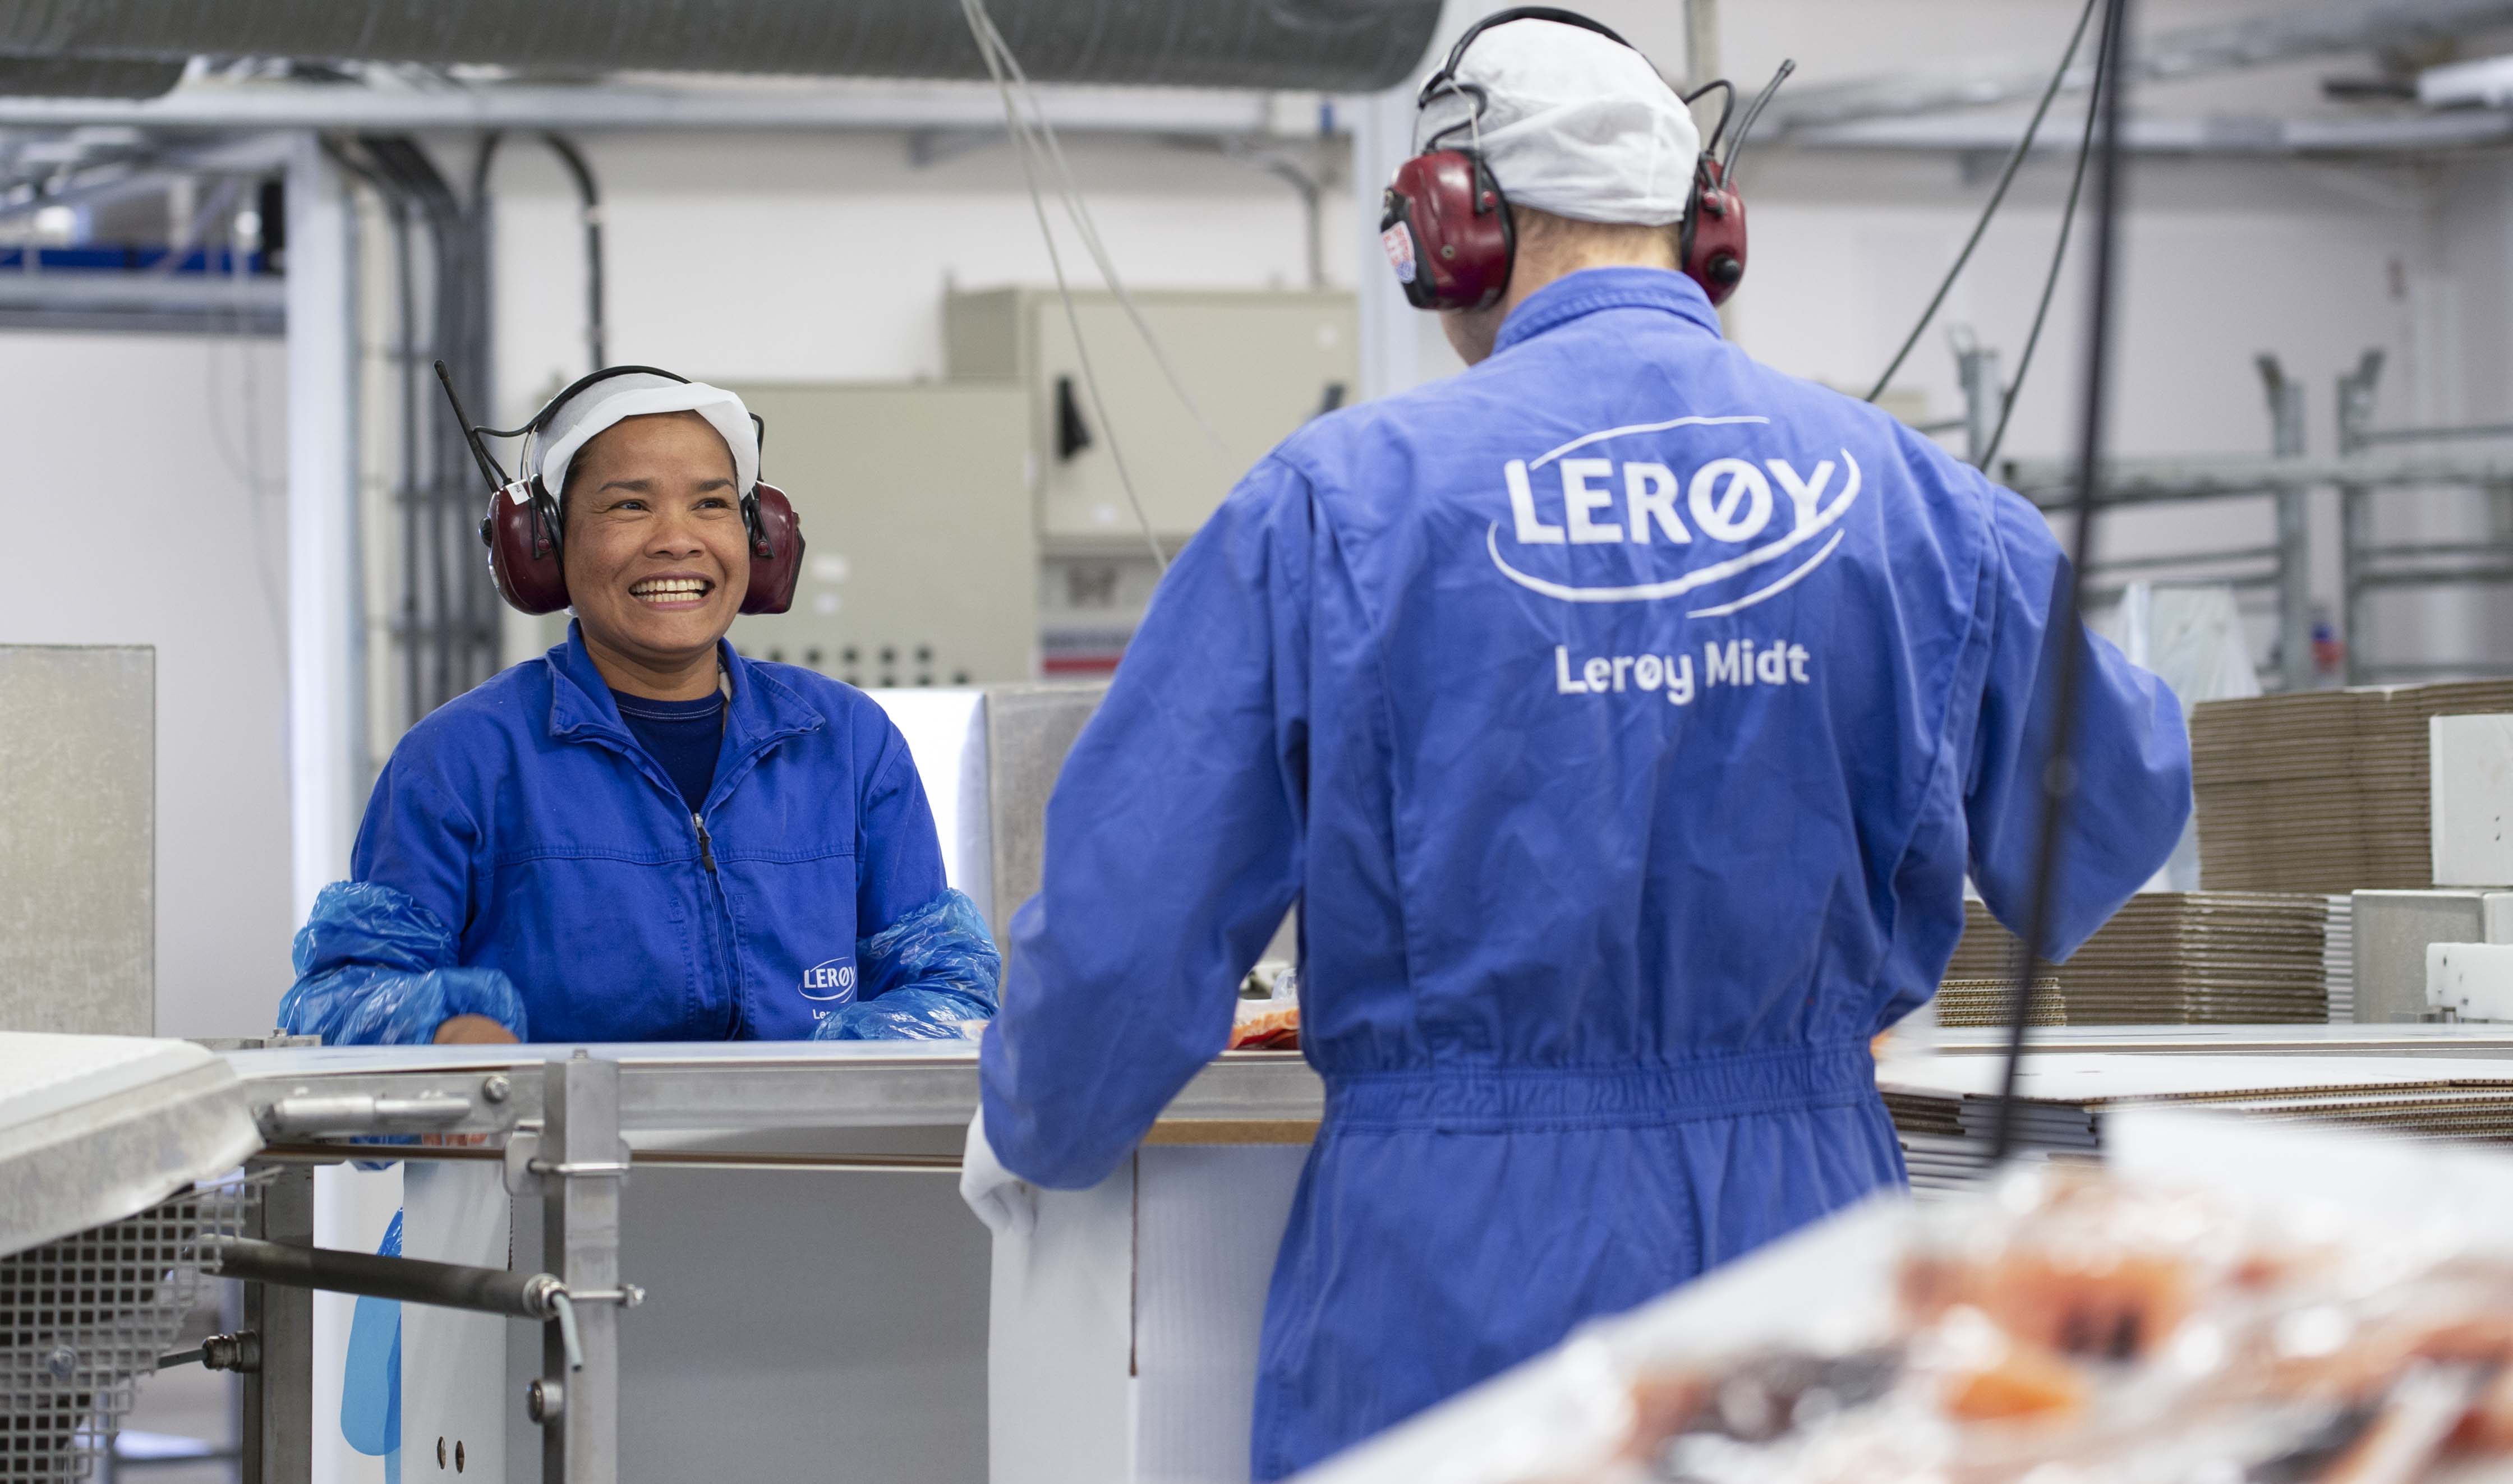 Two employees working at the facory in blue workwear